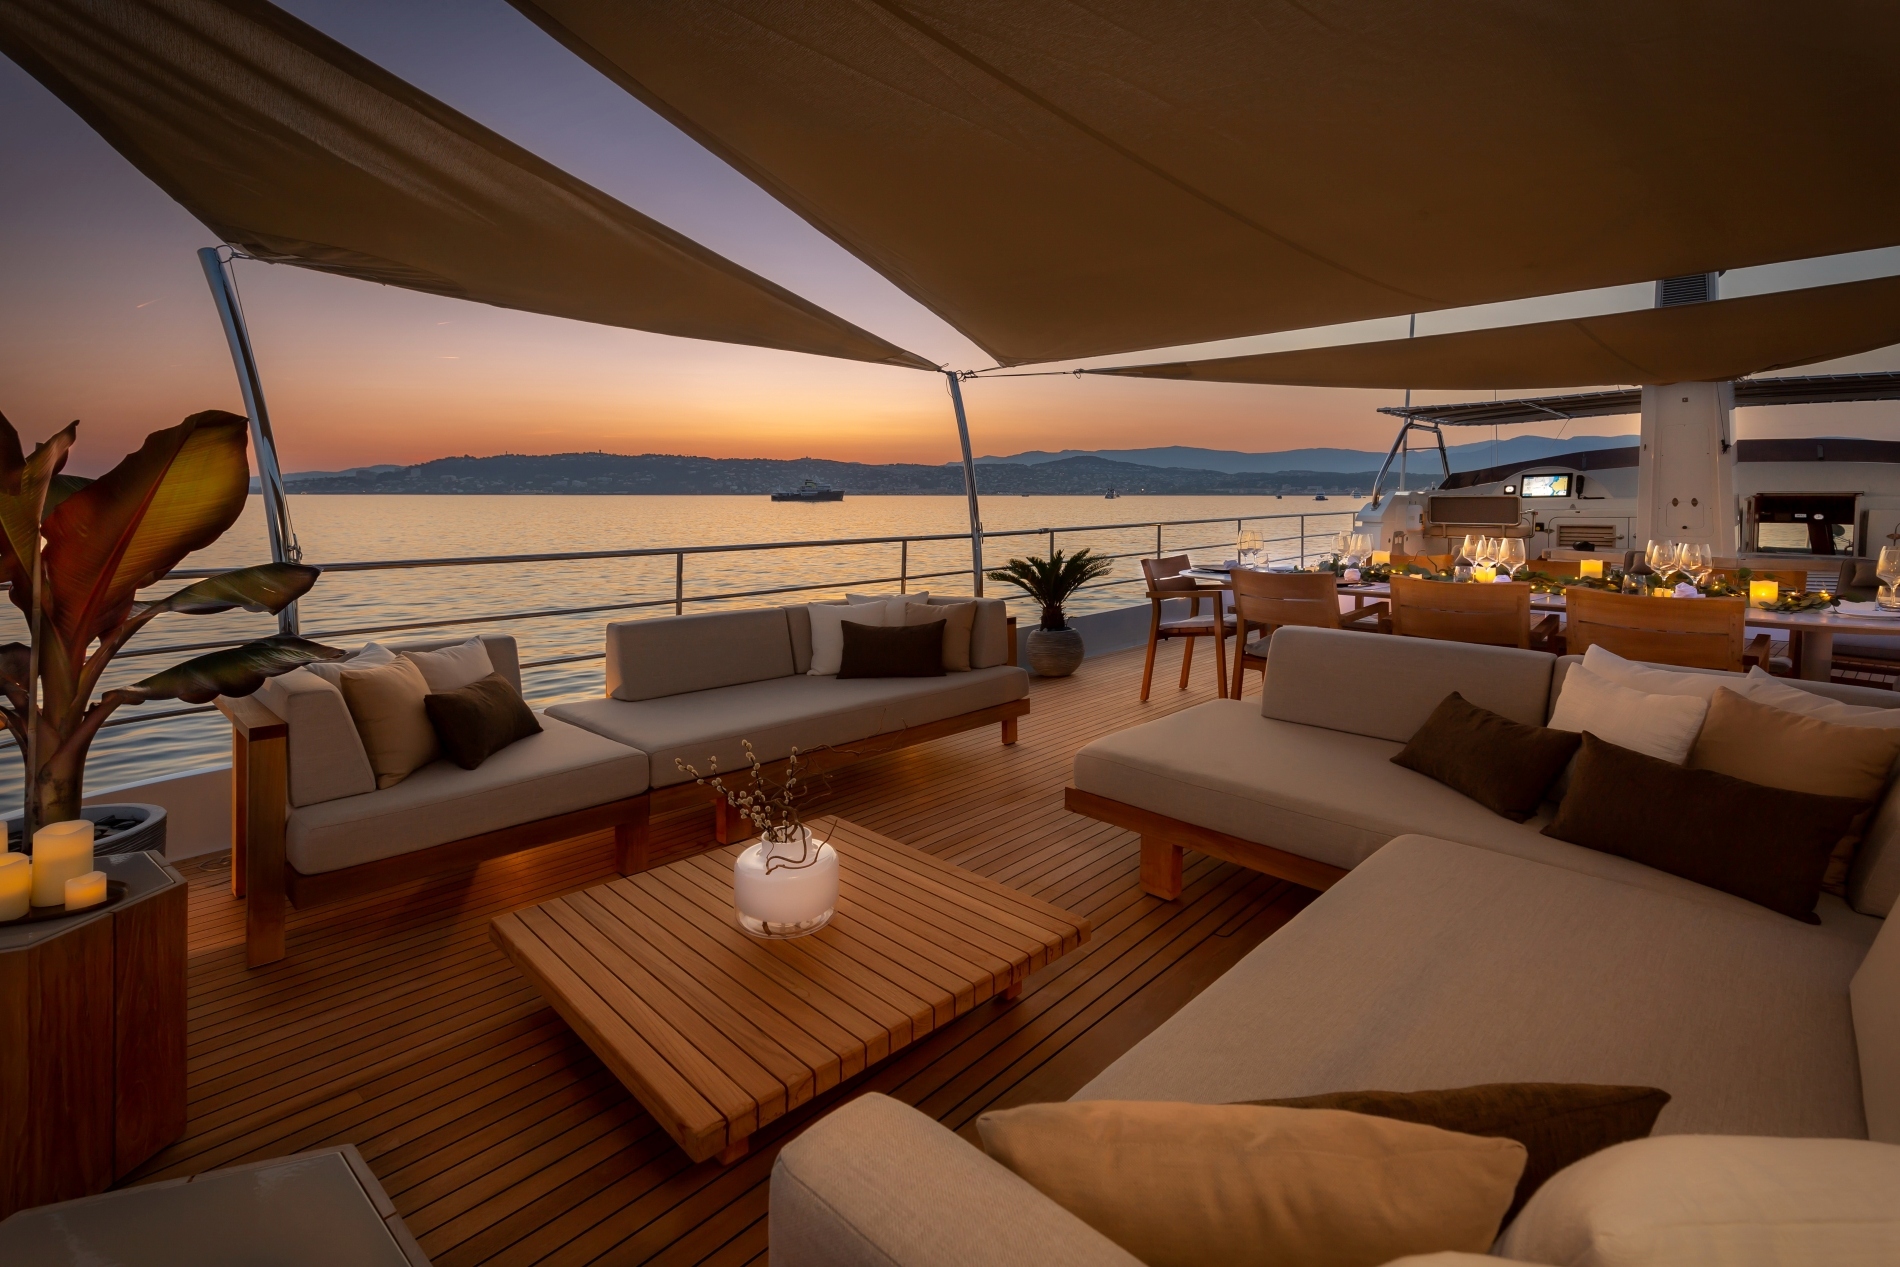 Spacious and cosy sundeck